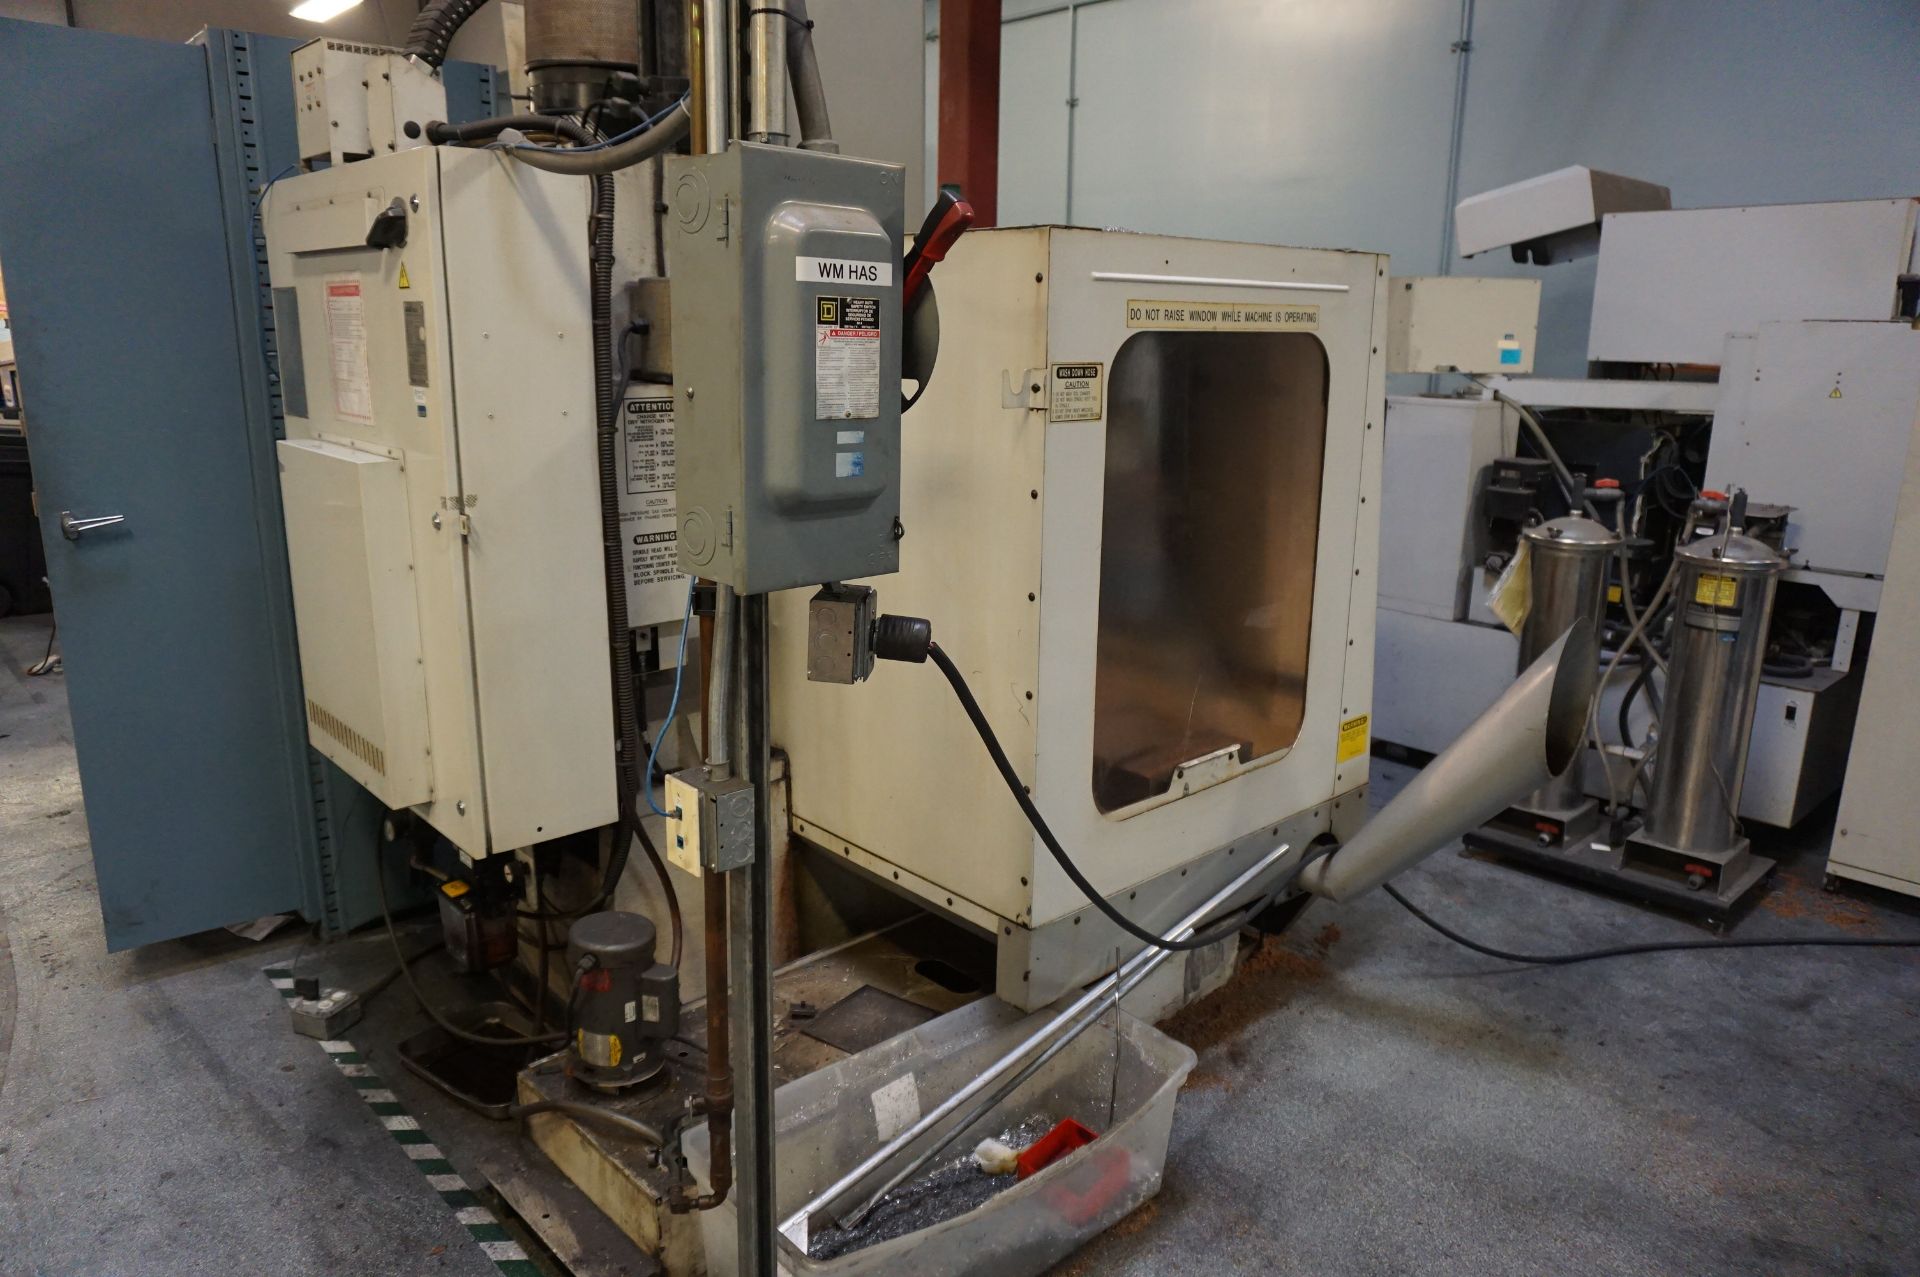 1999 HAAS VF-2 VERTICAL MACHINING CENTER, S/N 17306, PROGRAMMABLE COOLANT, ROYAL MISTBUSTER, 20 ATC - Image 3 of 11